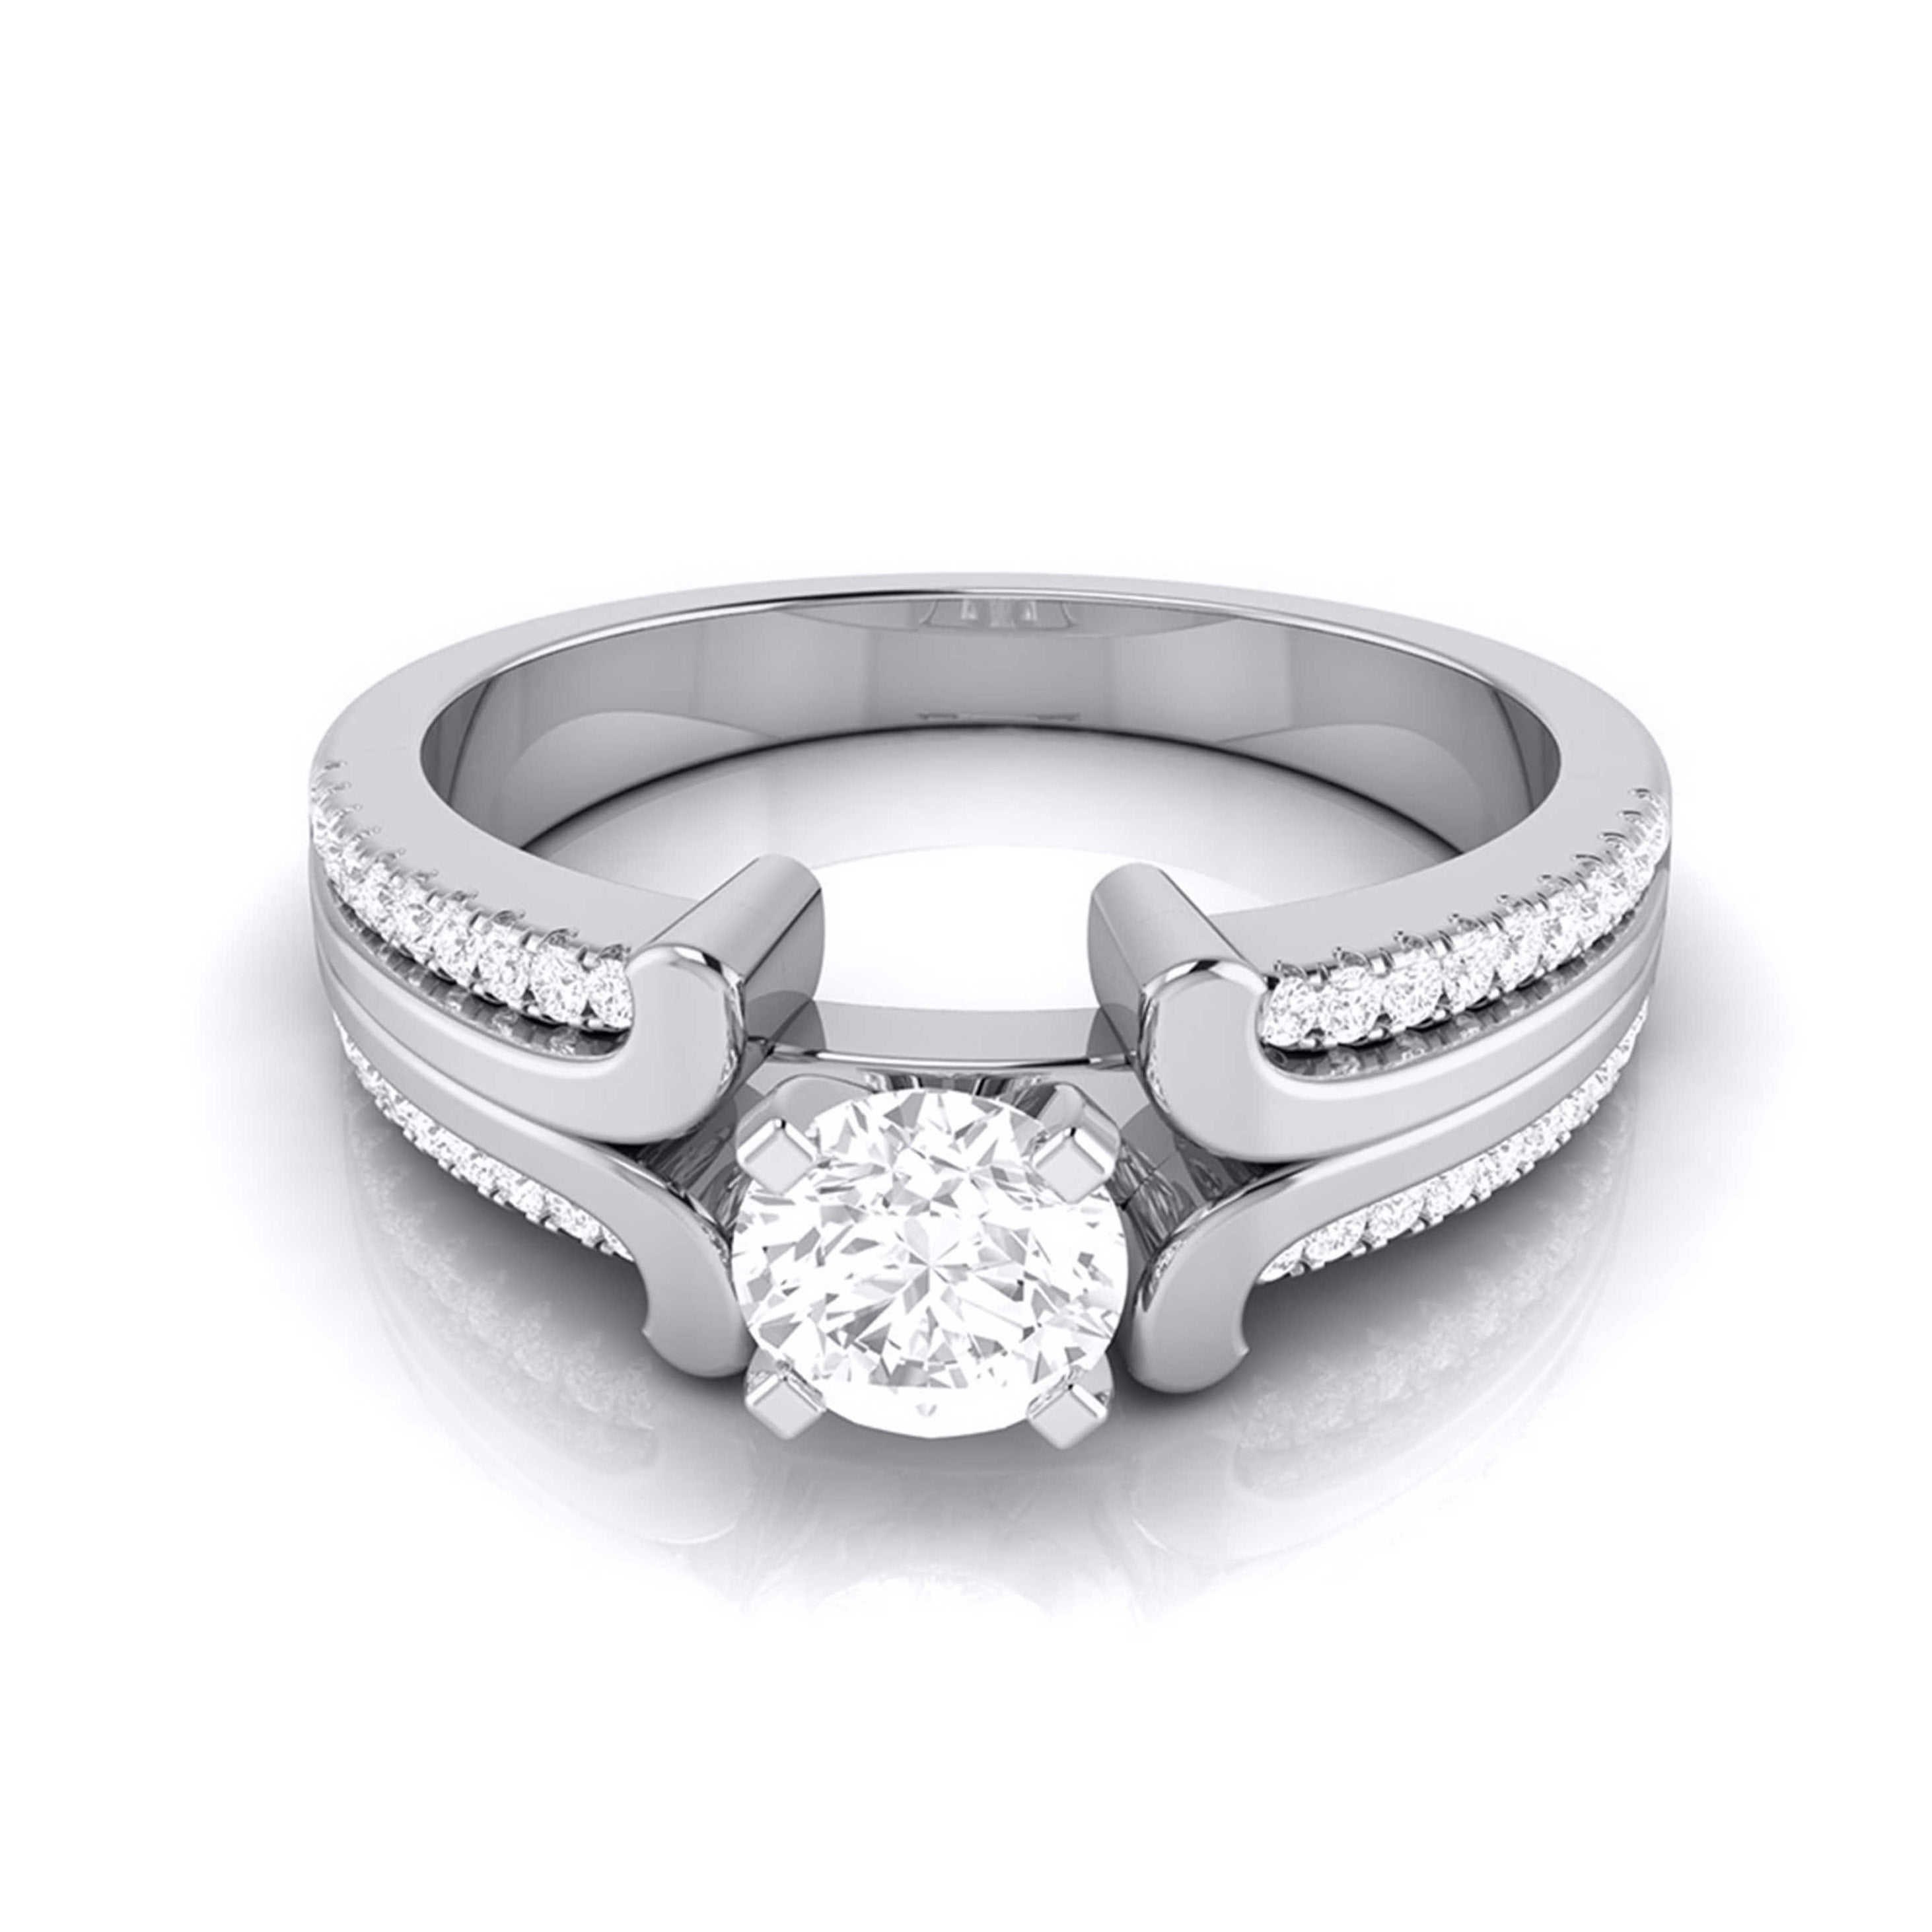 30-Pointer Solitaire Engagement Ring for Women with 2-Row Diamonds Shank JL PT G 116   Jewelove.US